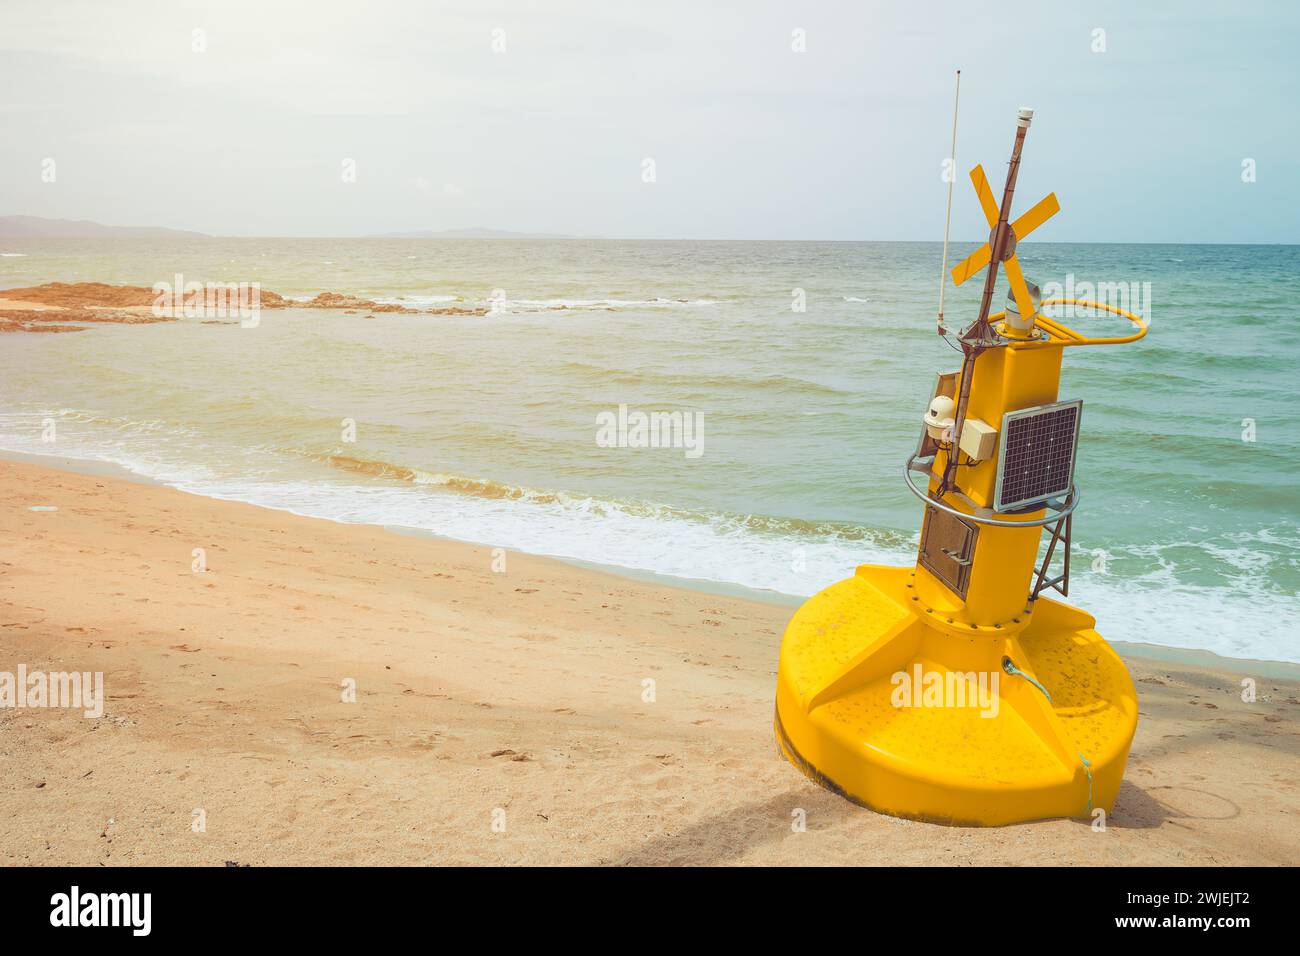 Buoy with Smart Technology Device Solar panel for Realtime Tracking Data Monitoring Sea and Weather Phenomenon Stock Photo